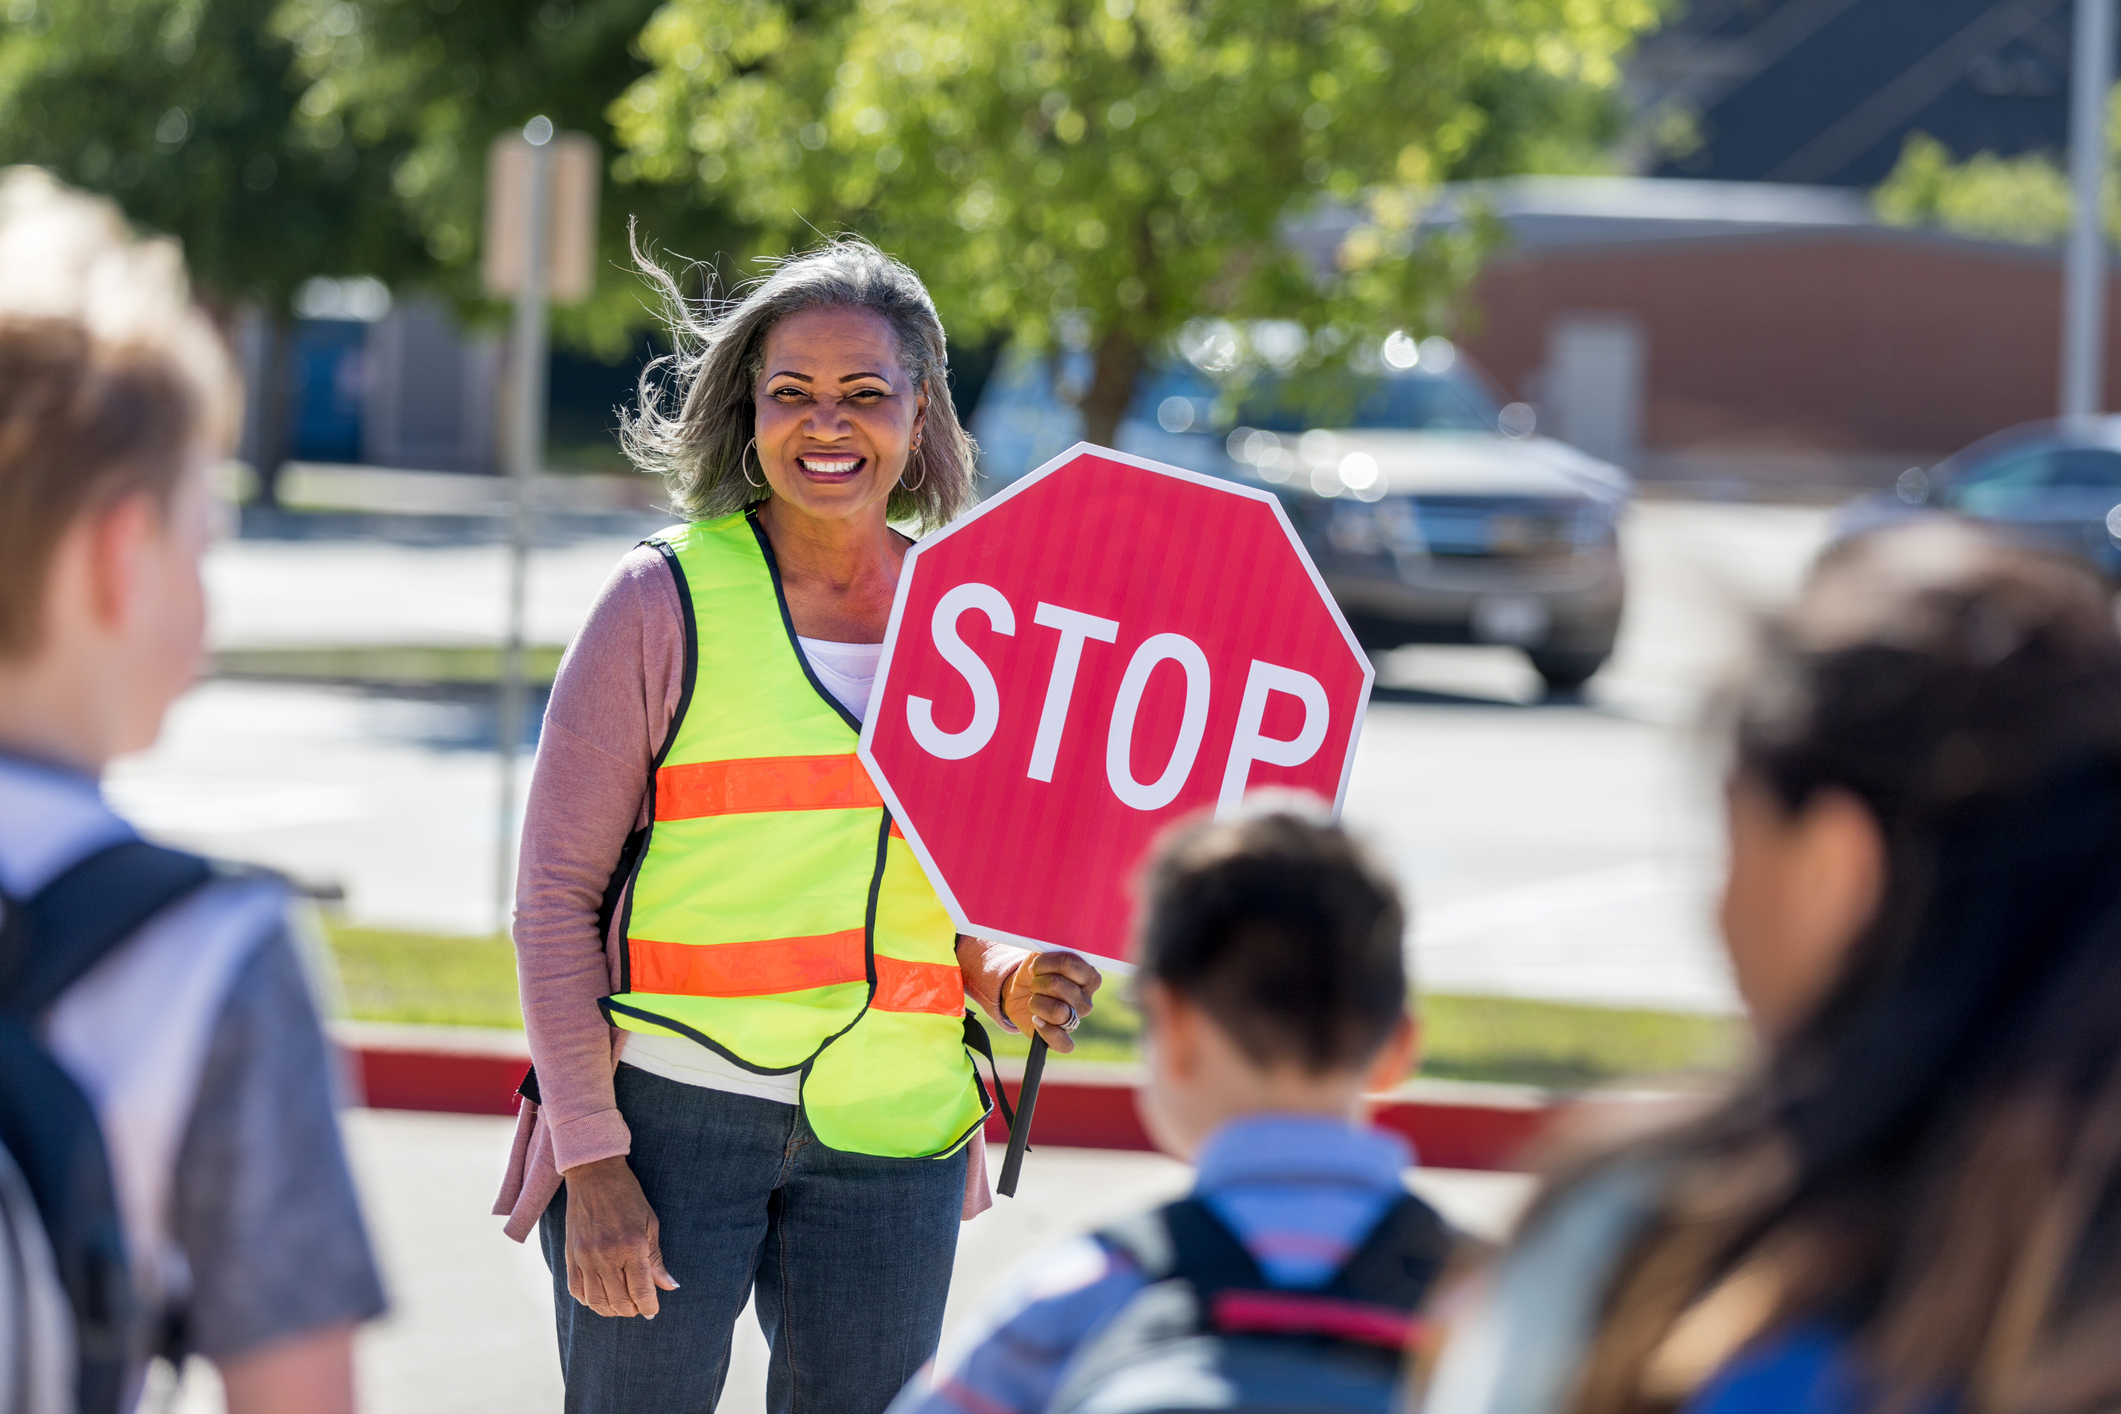 Crossing guard tells children to stop